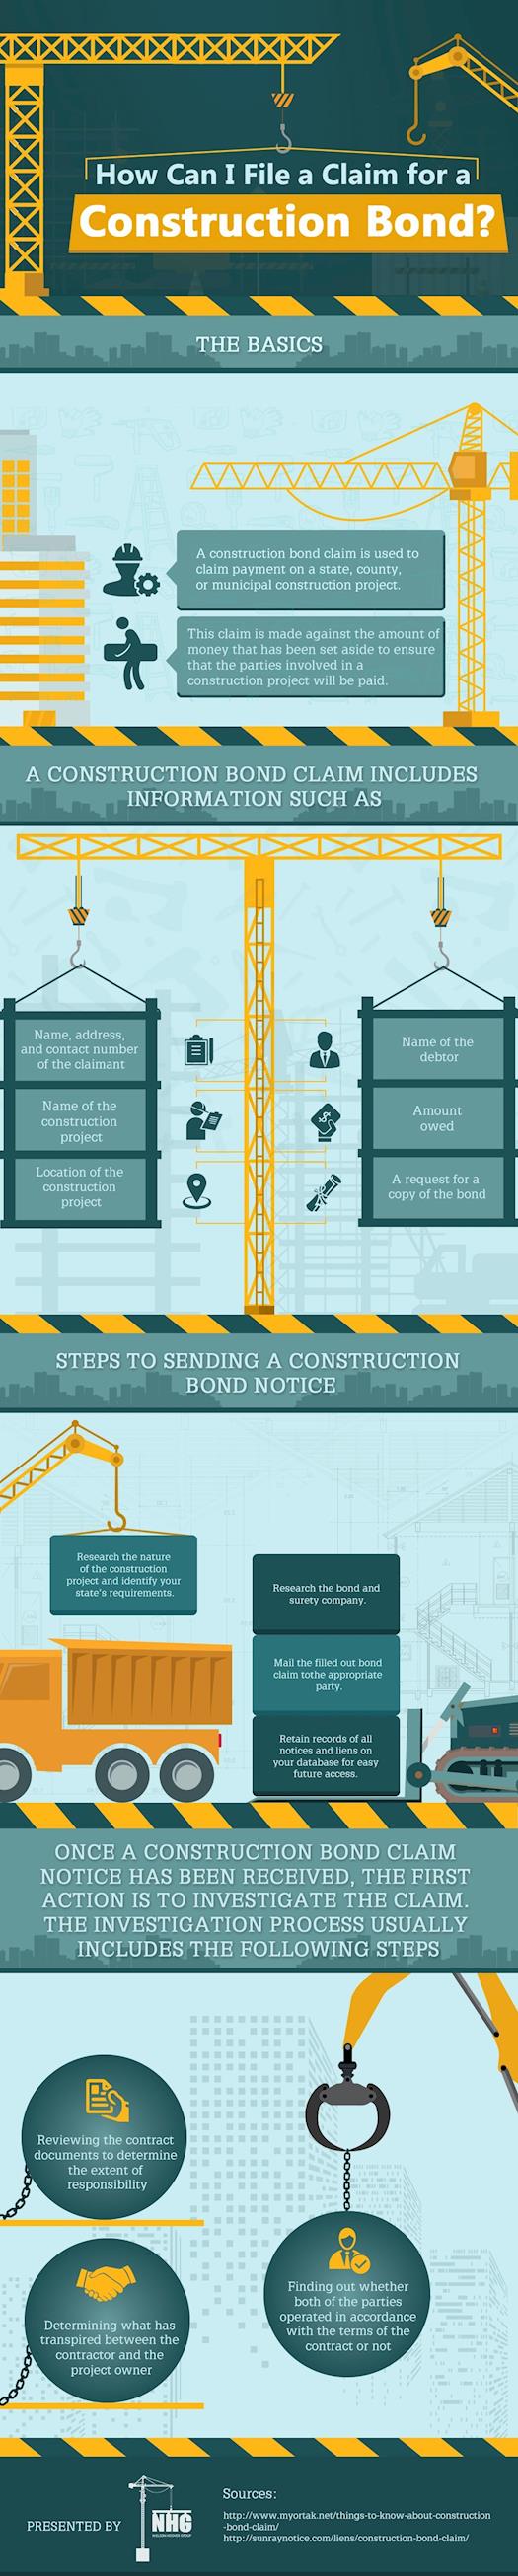 The Process of Construction Bond Claims